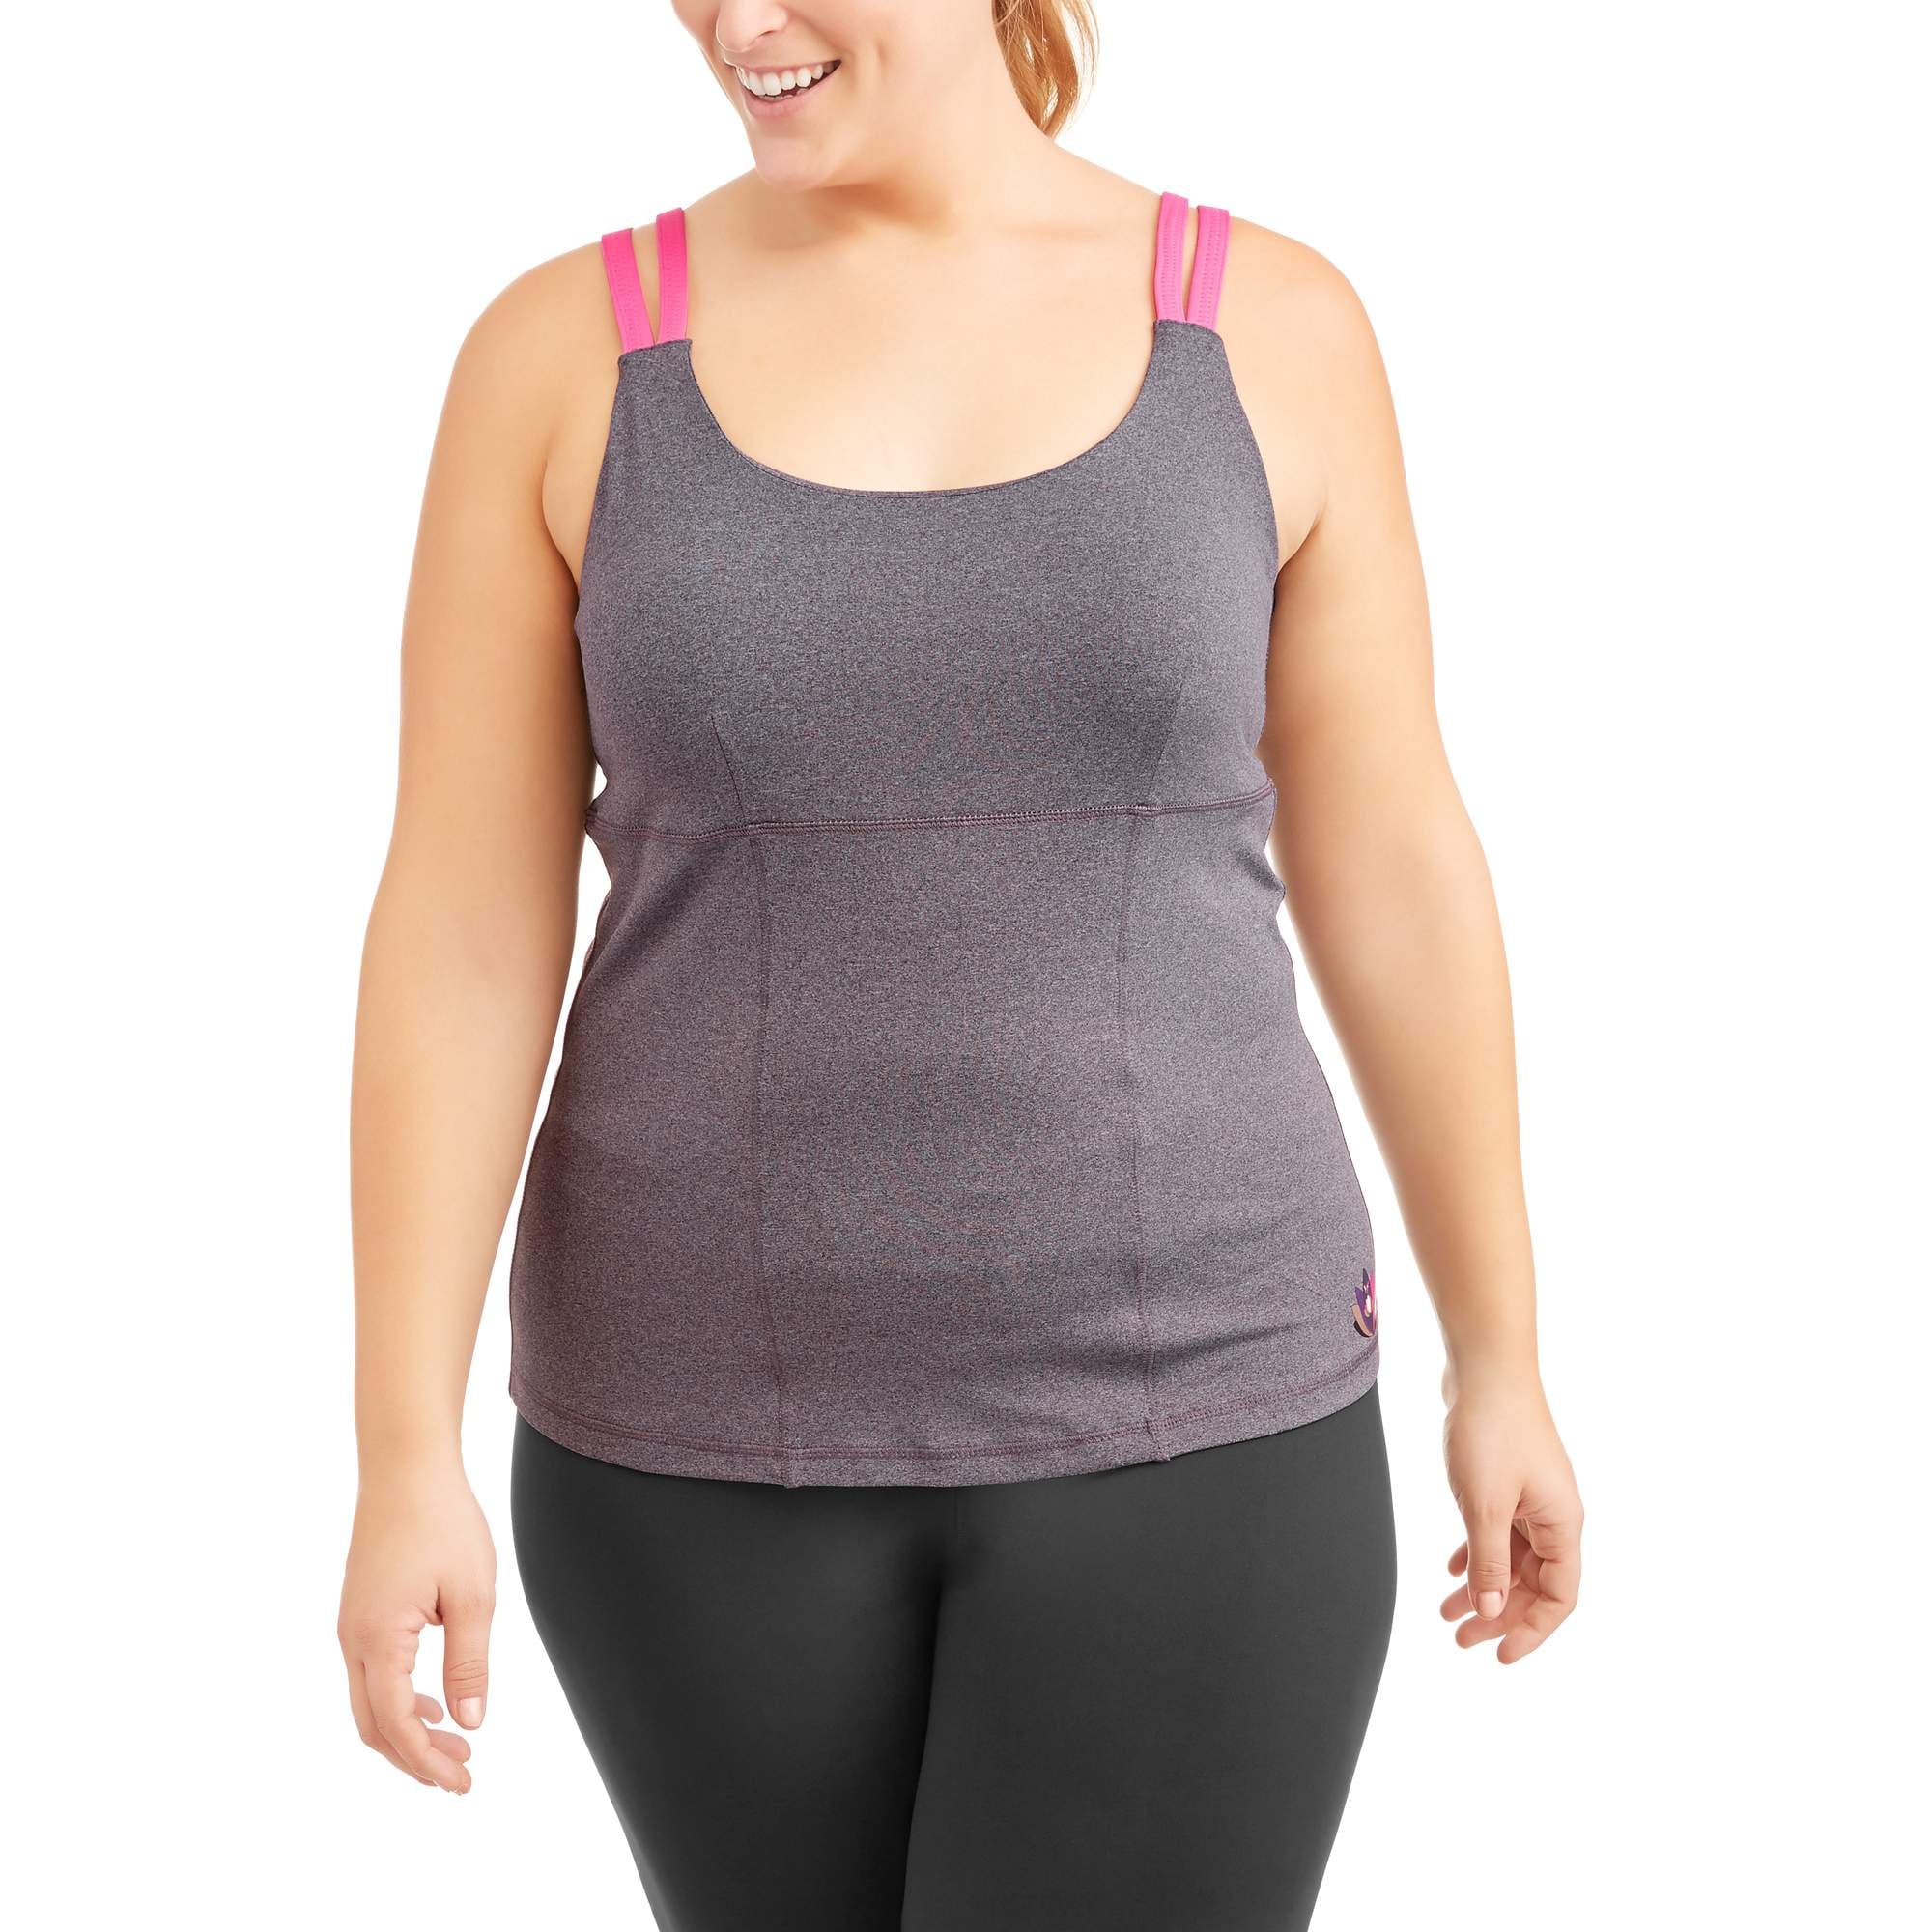 Plus-Size Workout Clothes From Walmart ...